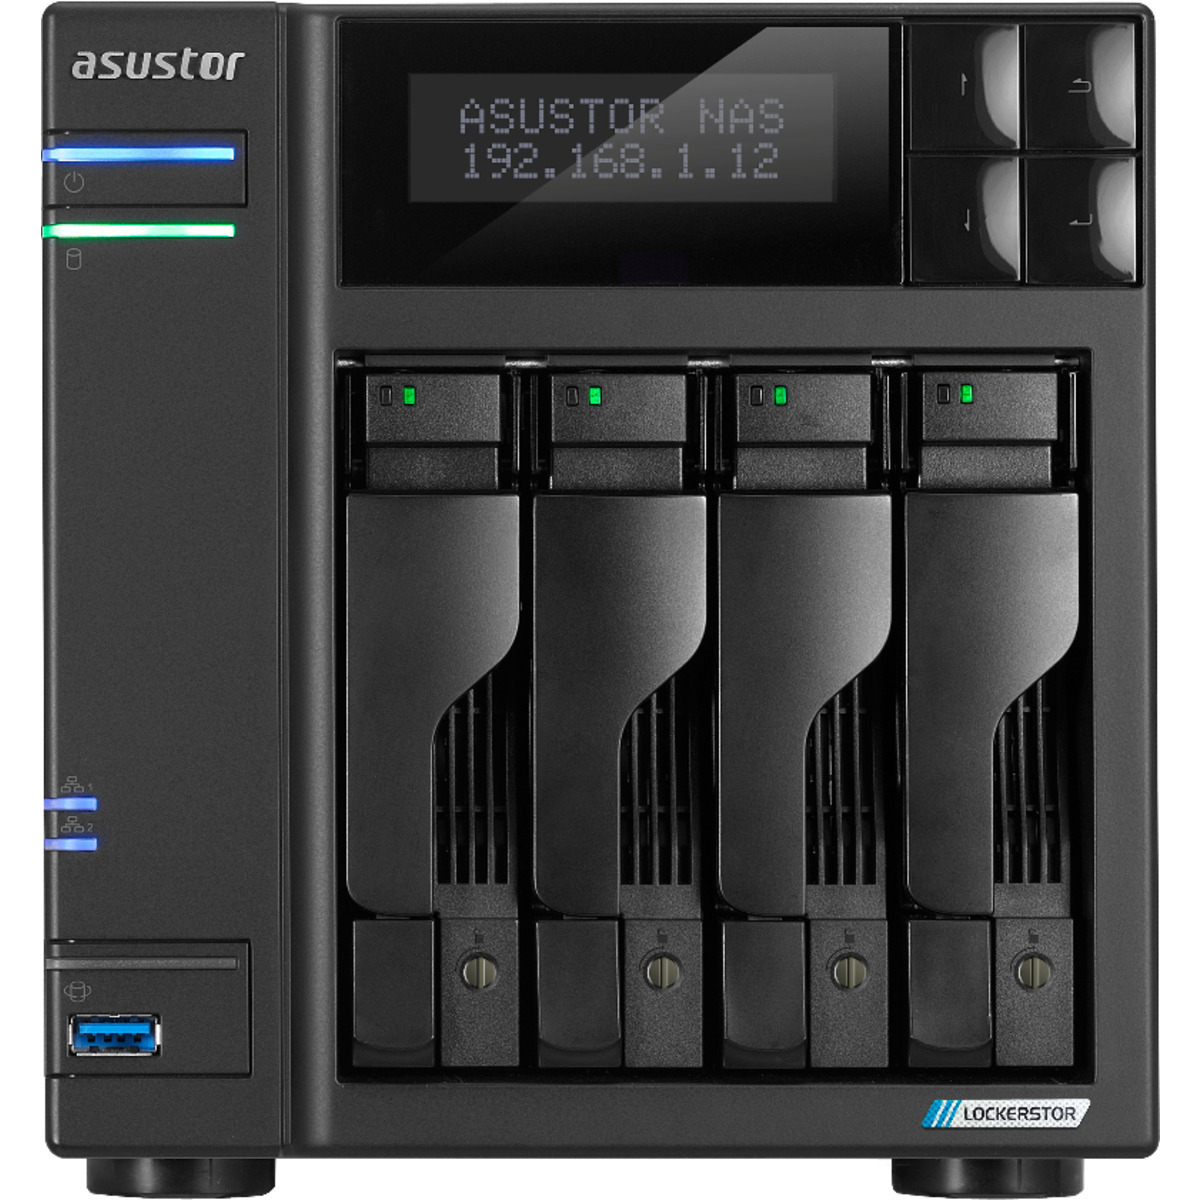 ASUSTOR LOCKERSTOR 4 Gen2 AS6704T 6tb 4-Bay Desktop Multimedia / Power User / Business NAS - Network Attached Storage Device 3x2tb Seagate IronWolf Pro ST2000NT001 3.5 7200rpm SATA 6Gb/s HDD NAS Class Drives Installed - Burn-In Tested - FREE RAM UPGRADE LOCKERSTOR 4 Gen2 AS6704T